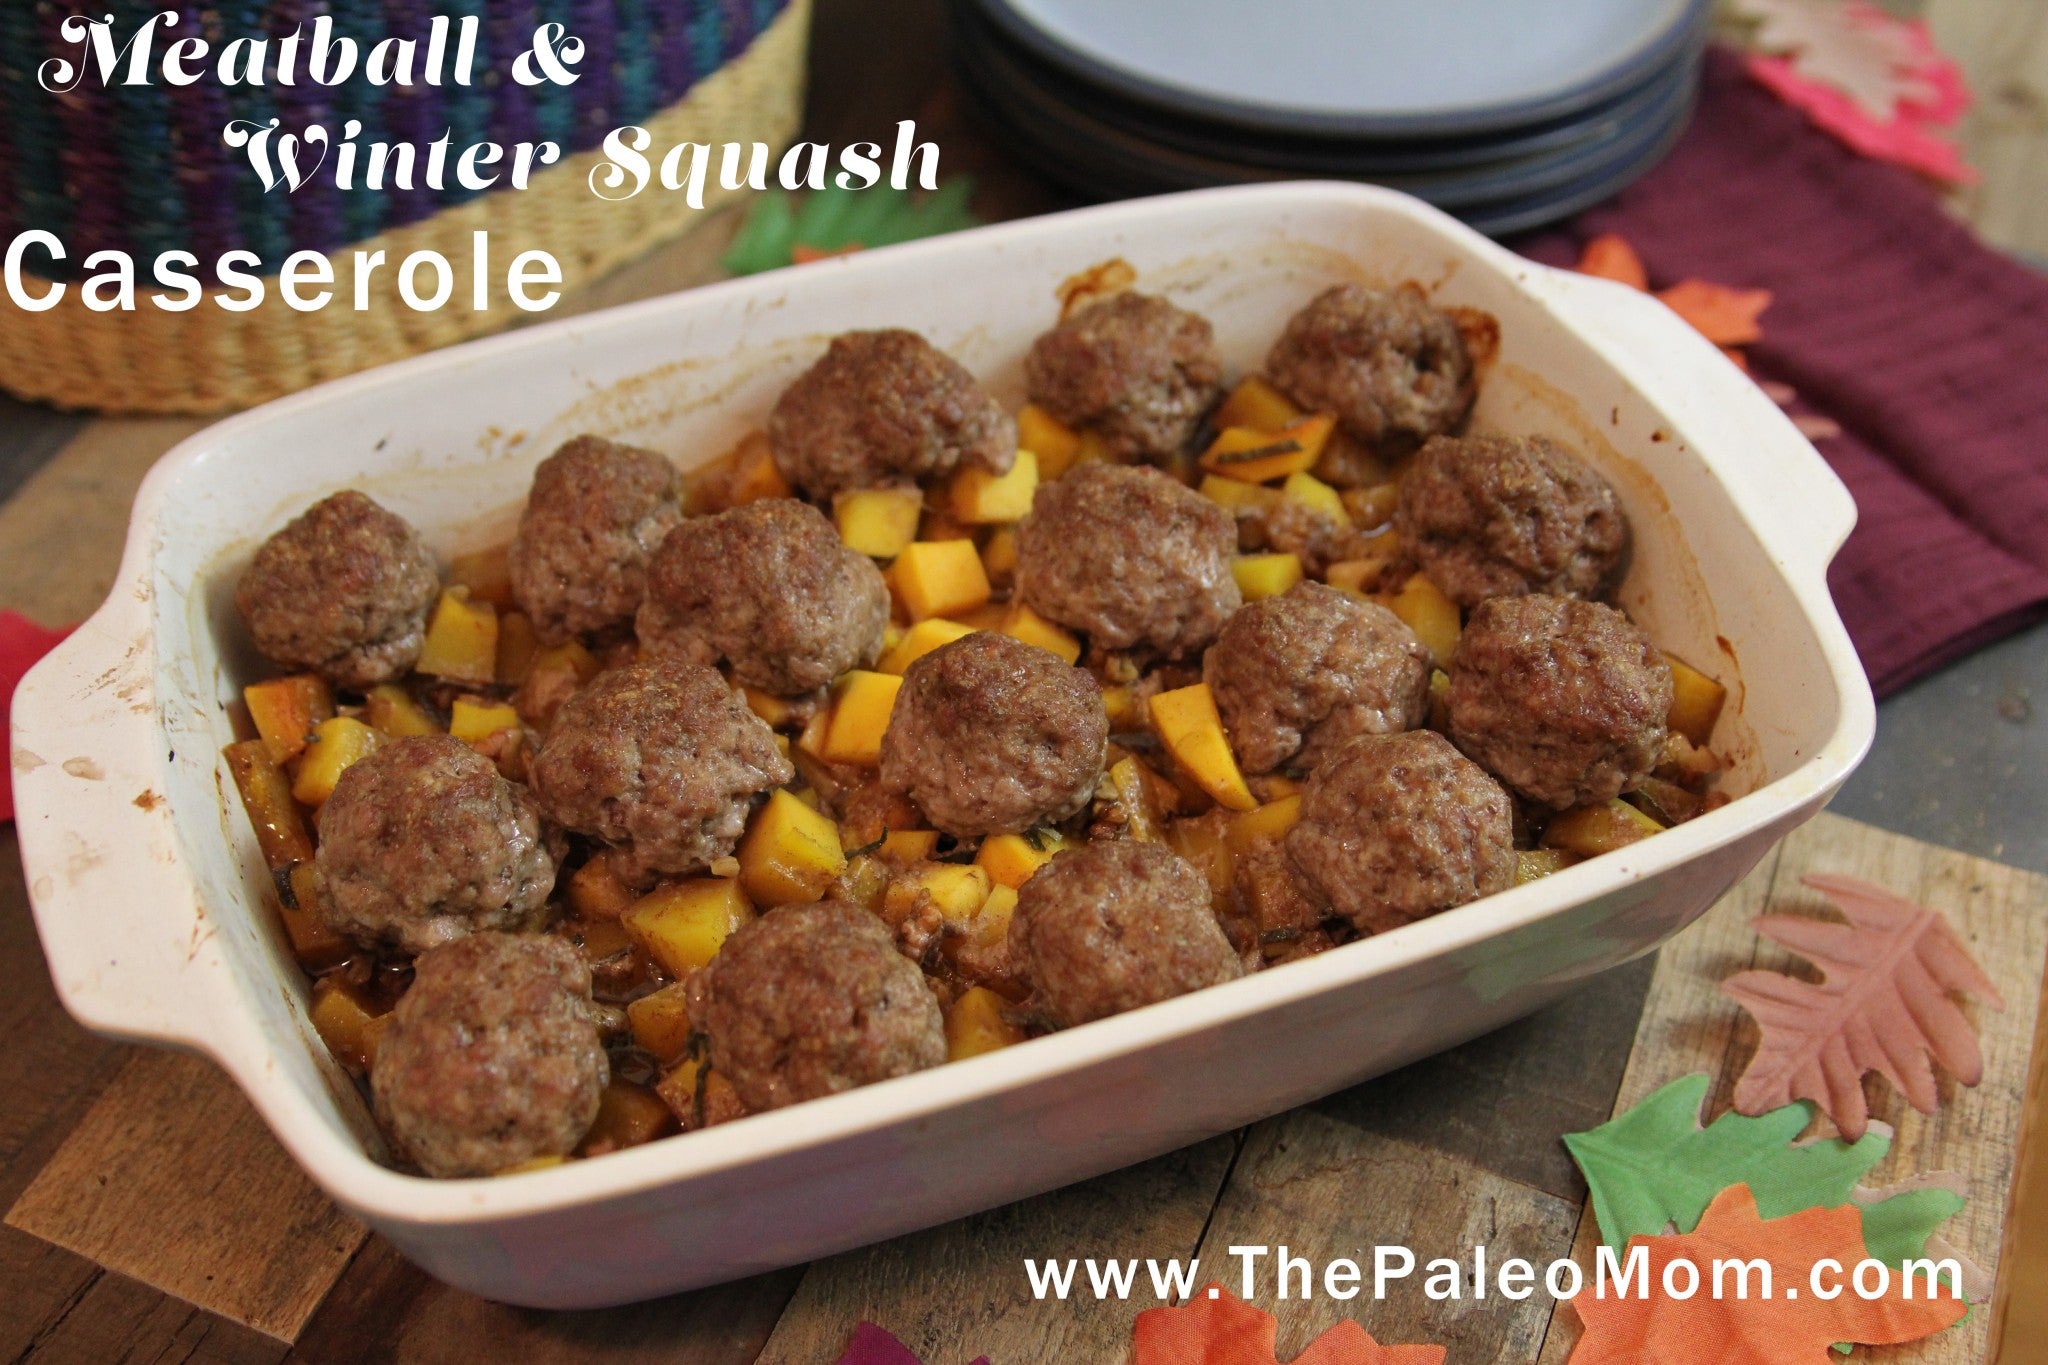 Meatball and Winter Squash Casserole, From The Paleo Mom.